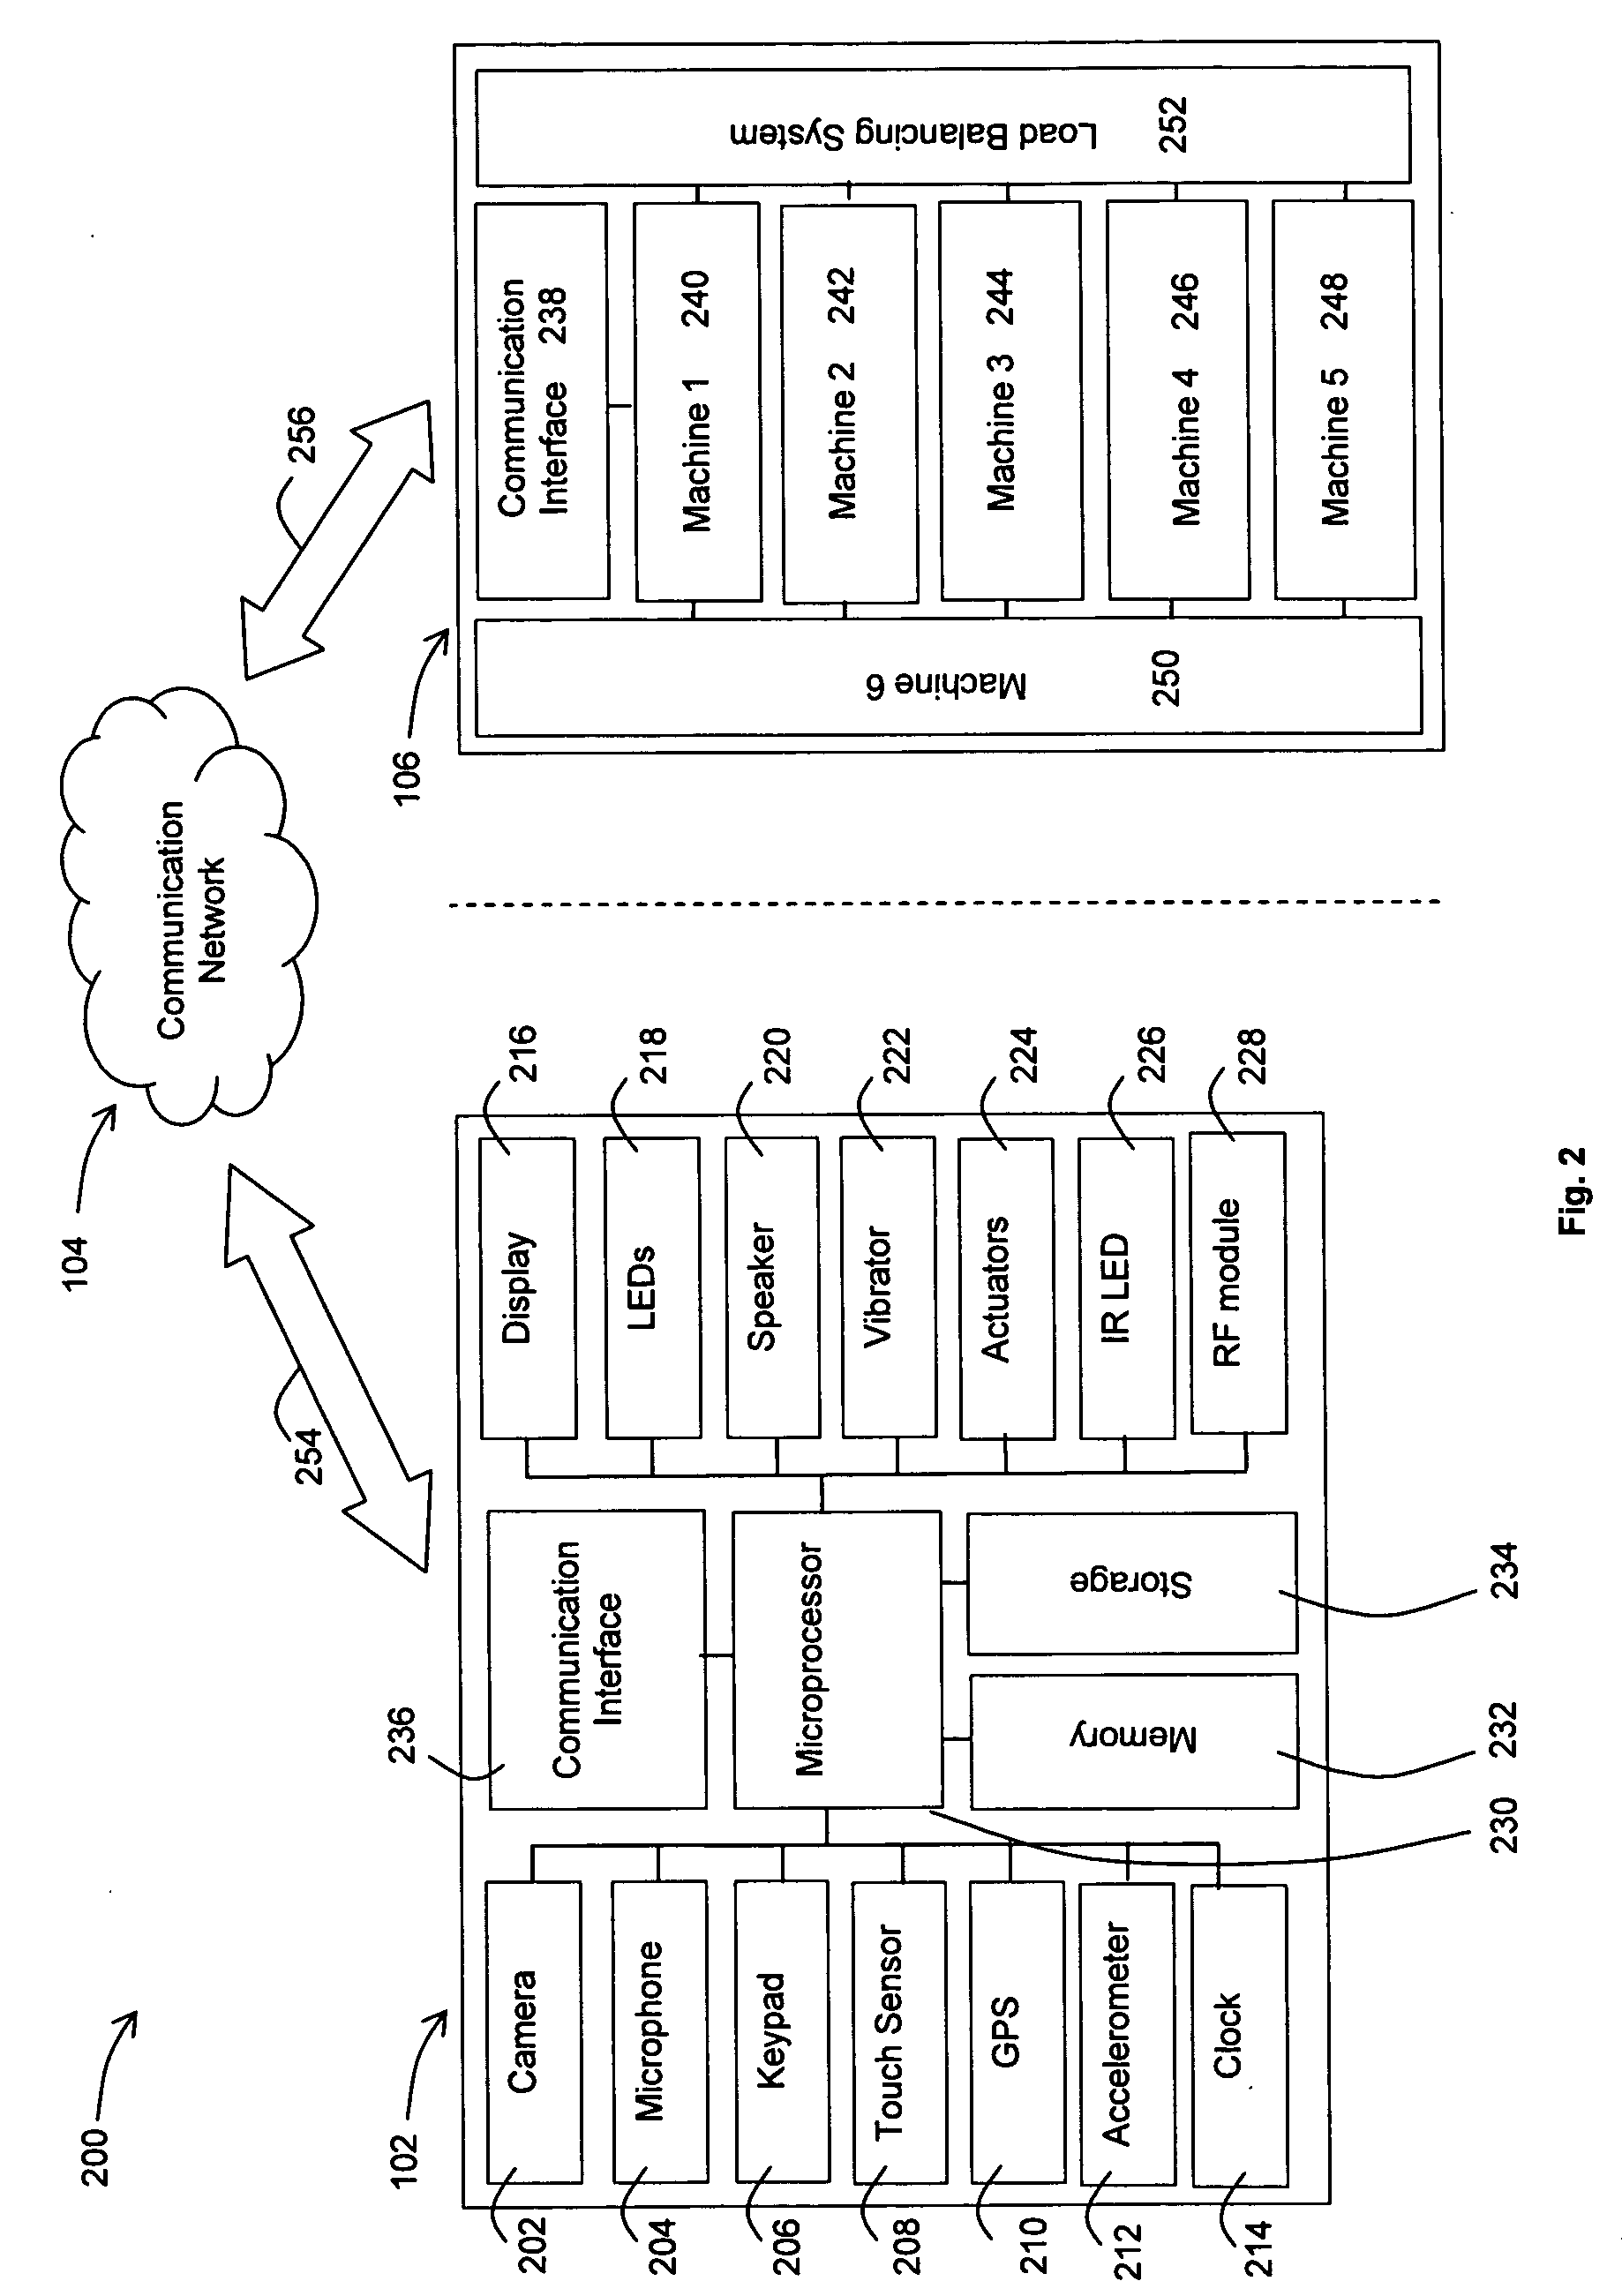 Method and system for providing information services relevant to visual imagery